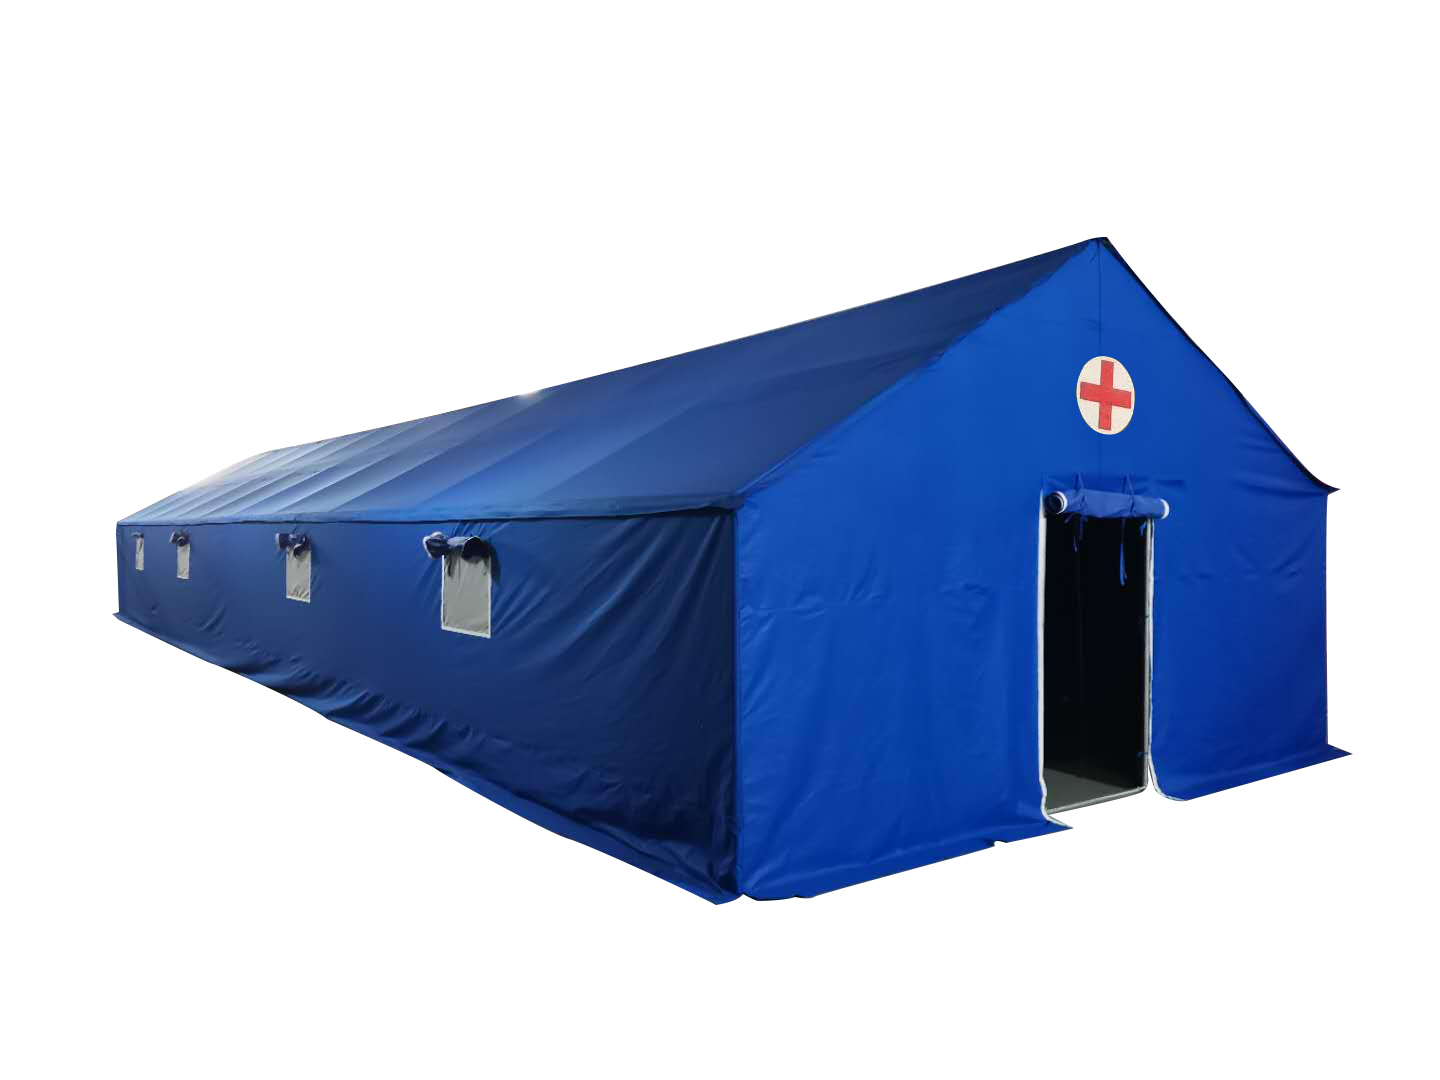 Relief Tents: Shelters of Hope in Crisis Situations